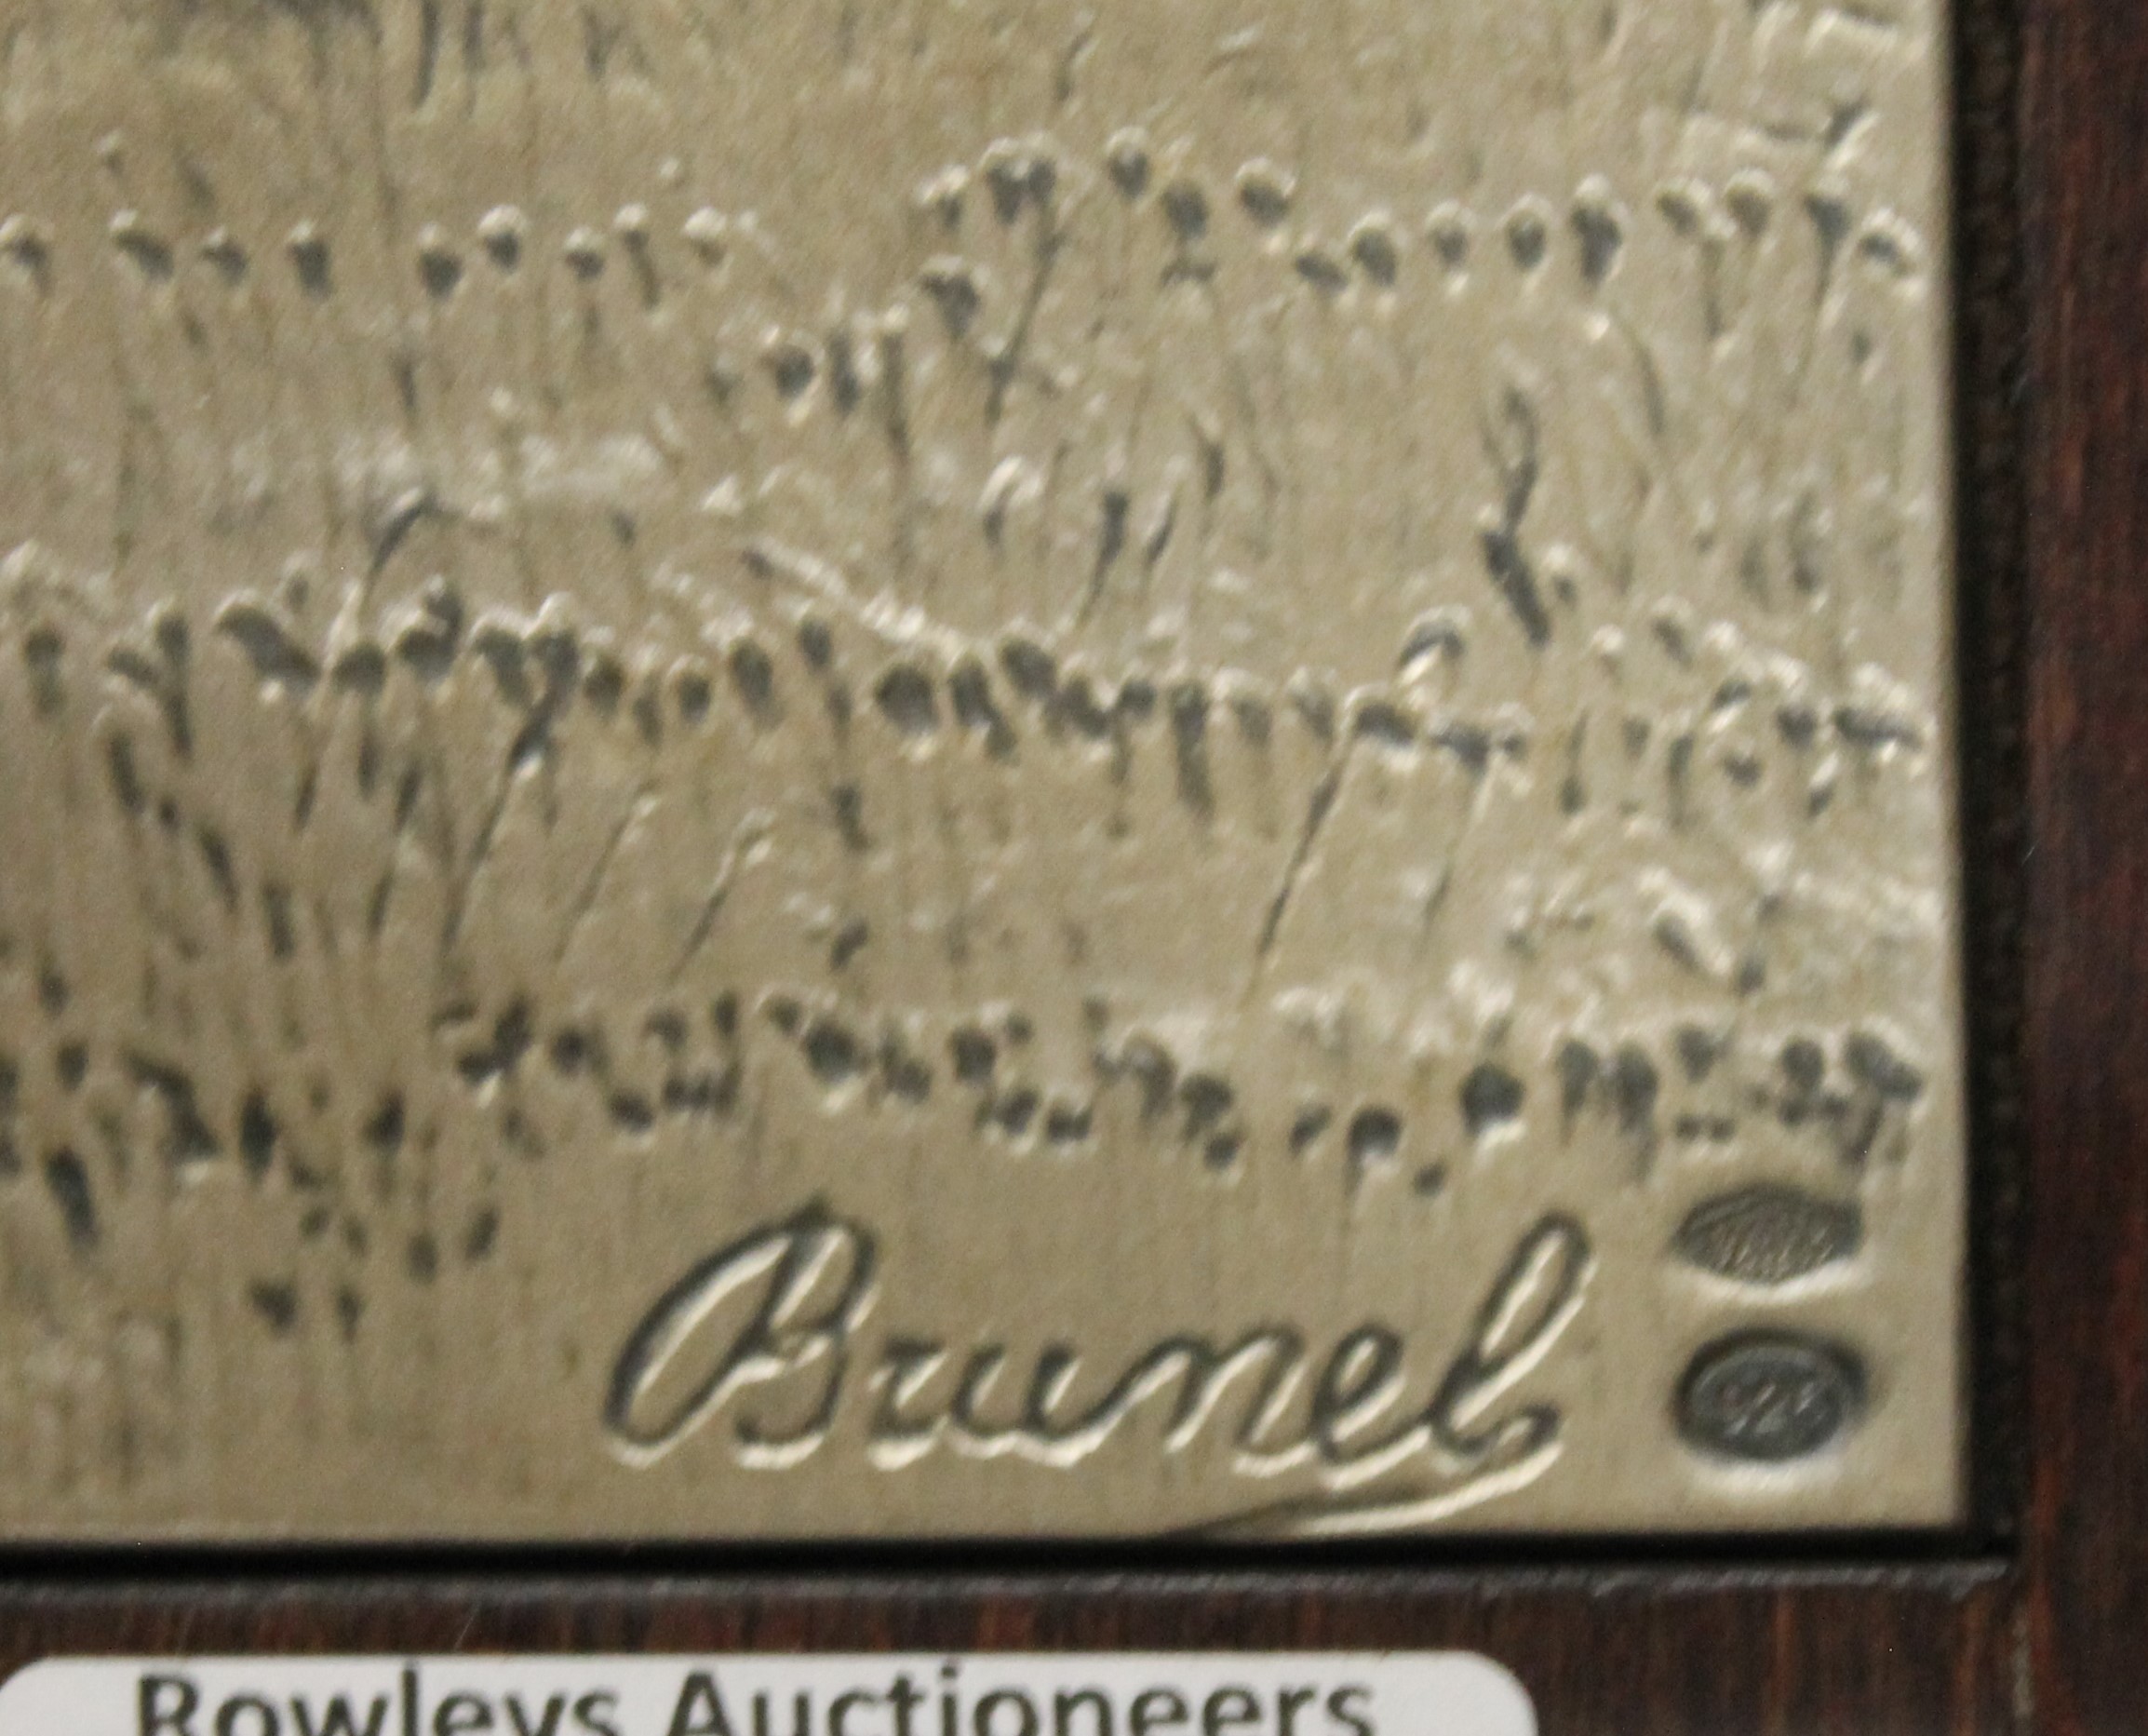 A 925 silver mounted plague of horses, signed BRUNEL, housed in a wooden frame. 34. - Image 3 of 3